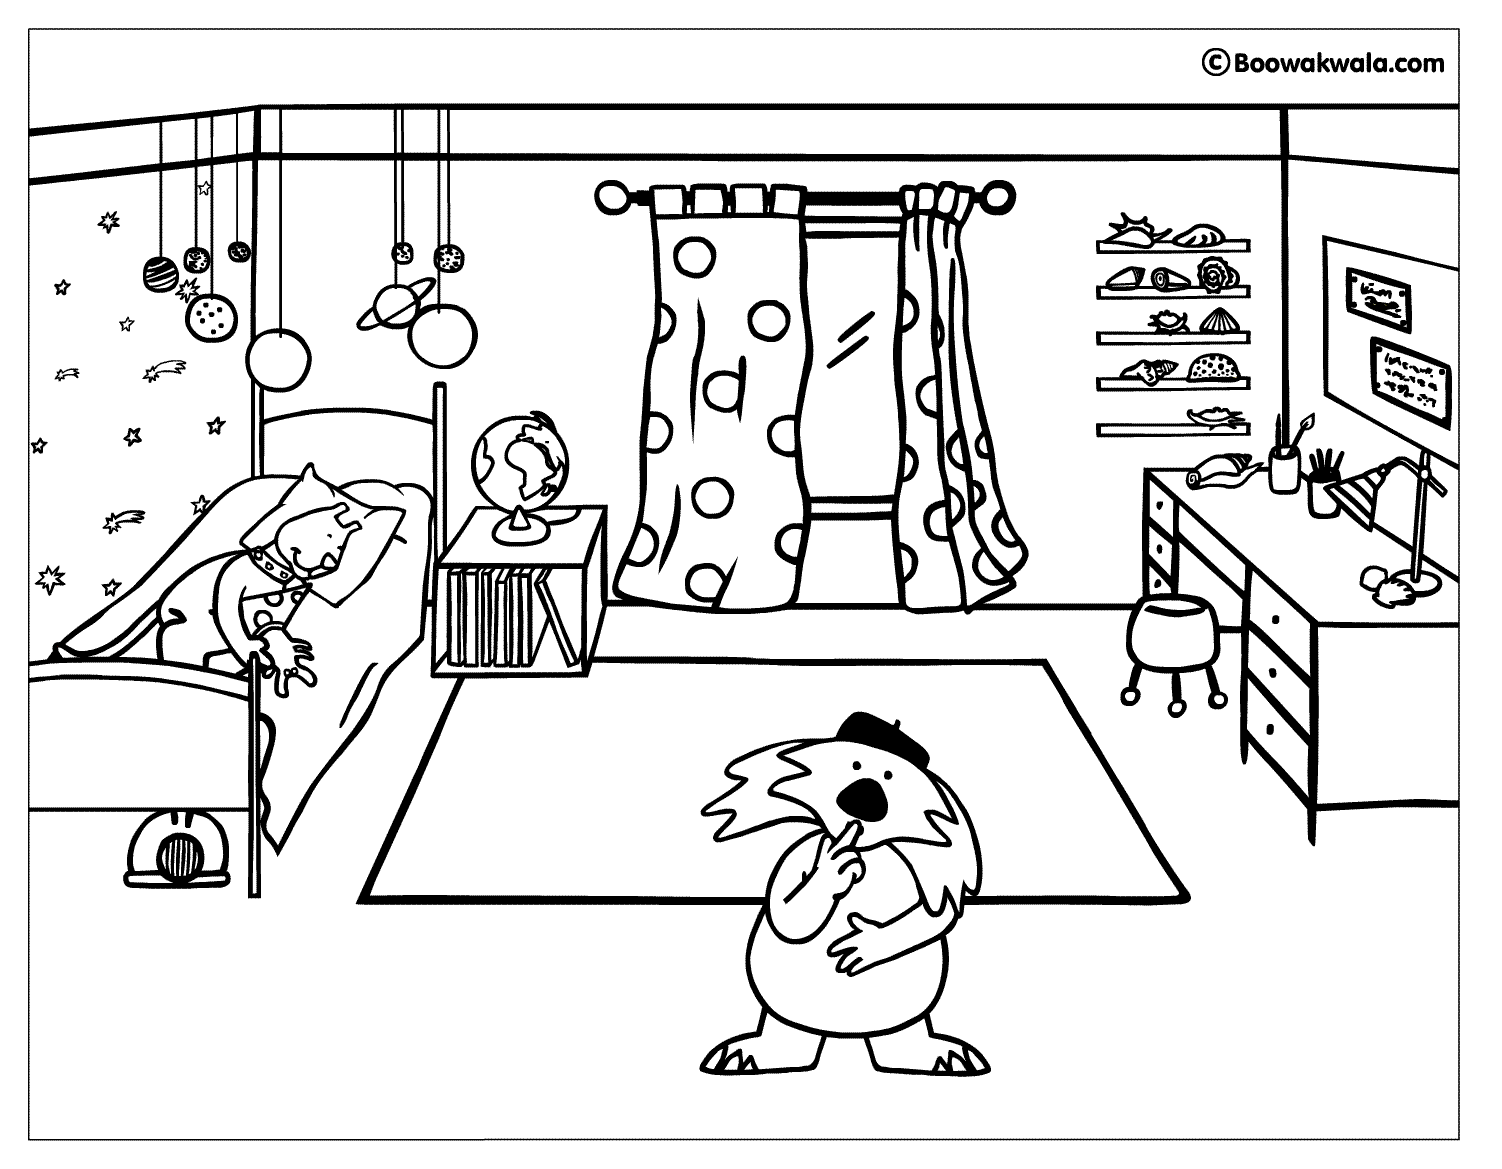 560 Simple Bedroom Interior Design Coloring Pages for Adult